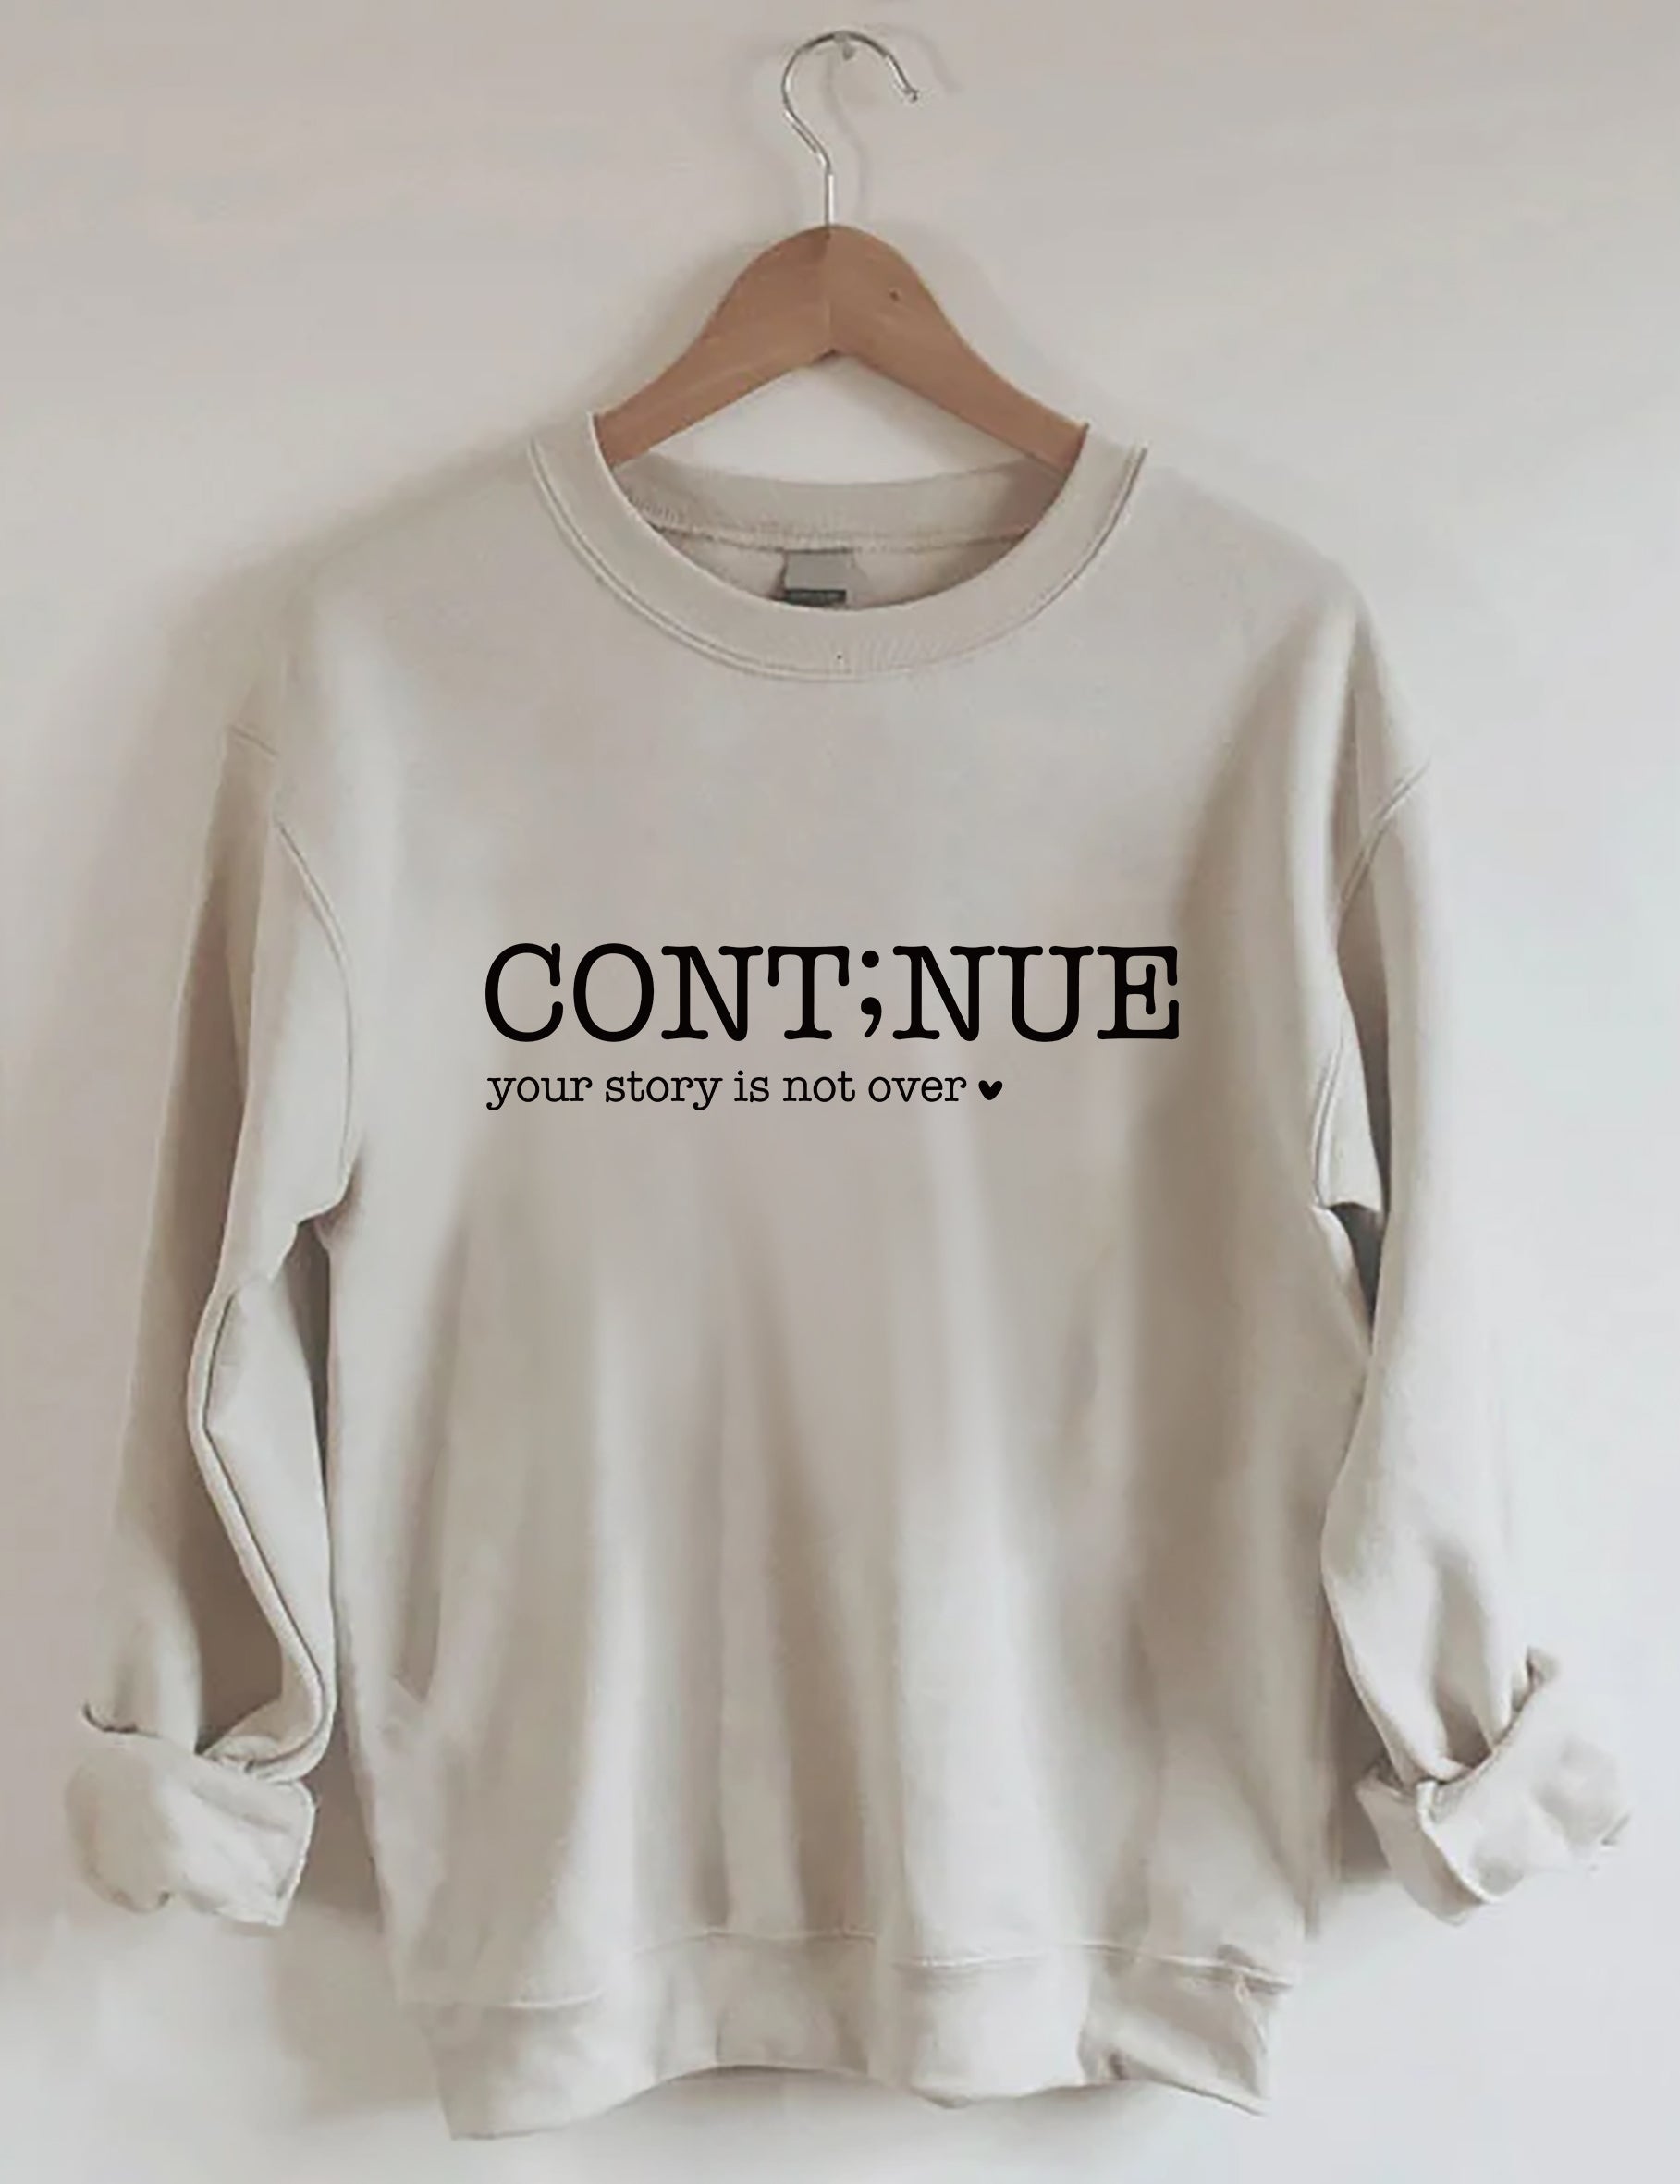 Continue Your Story Is Not Over Sweatshirt